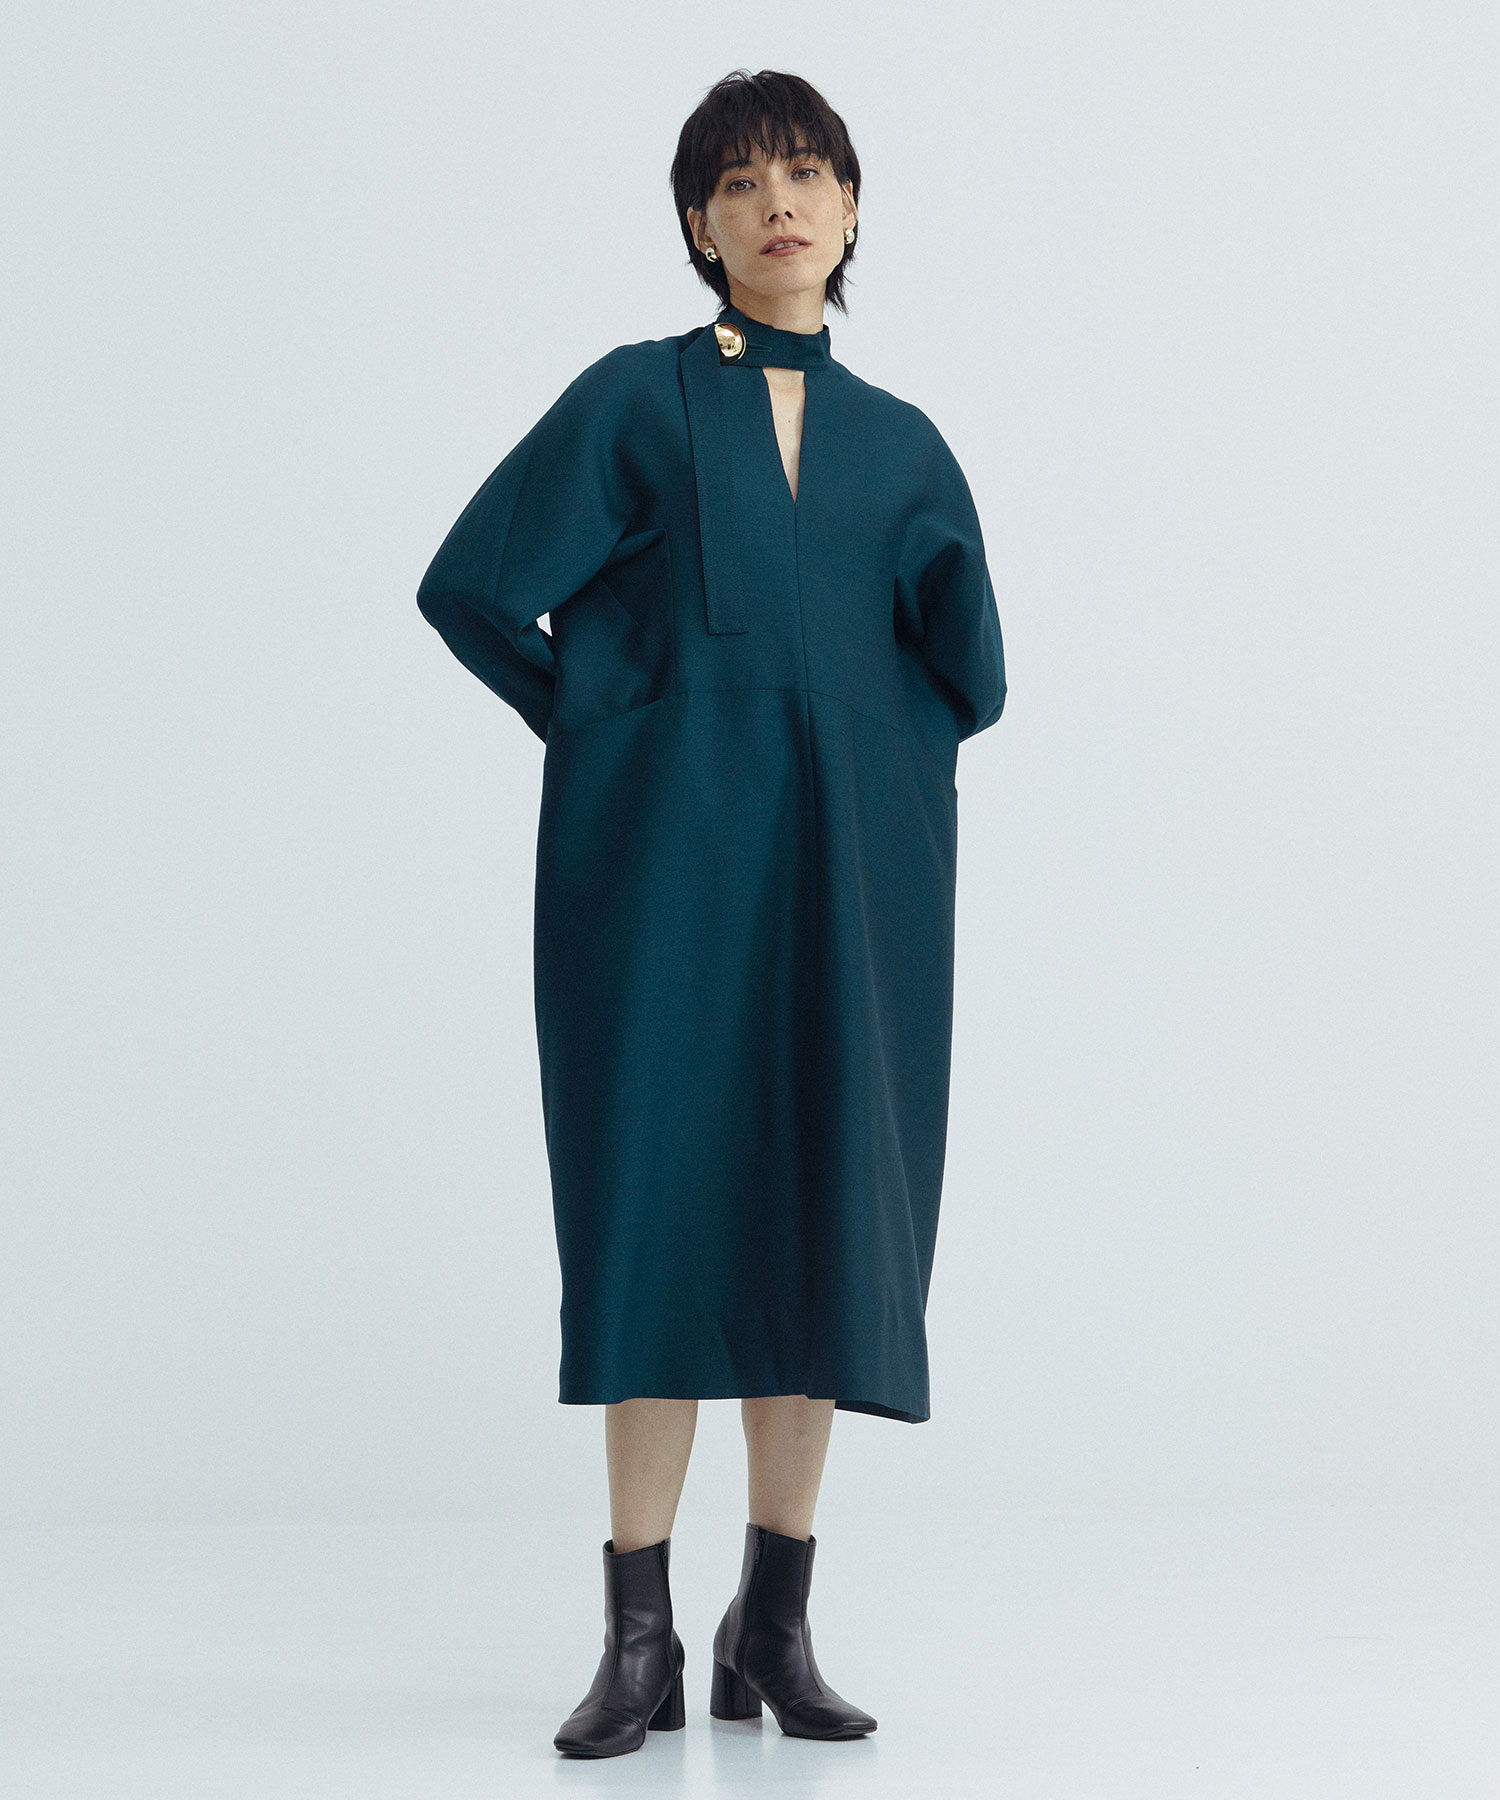 NEW ARRIVAL: WOMEN(並び順：高い順)｜THE TOKYO ONLINE STORE